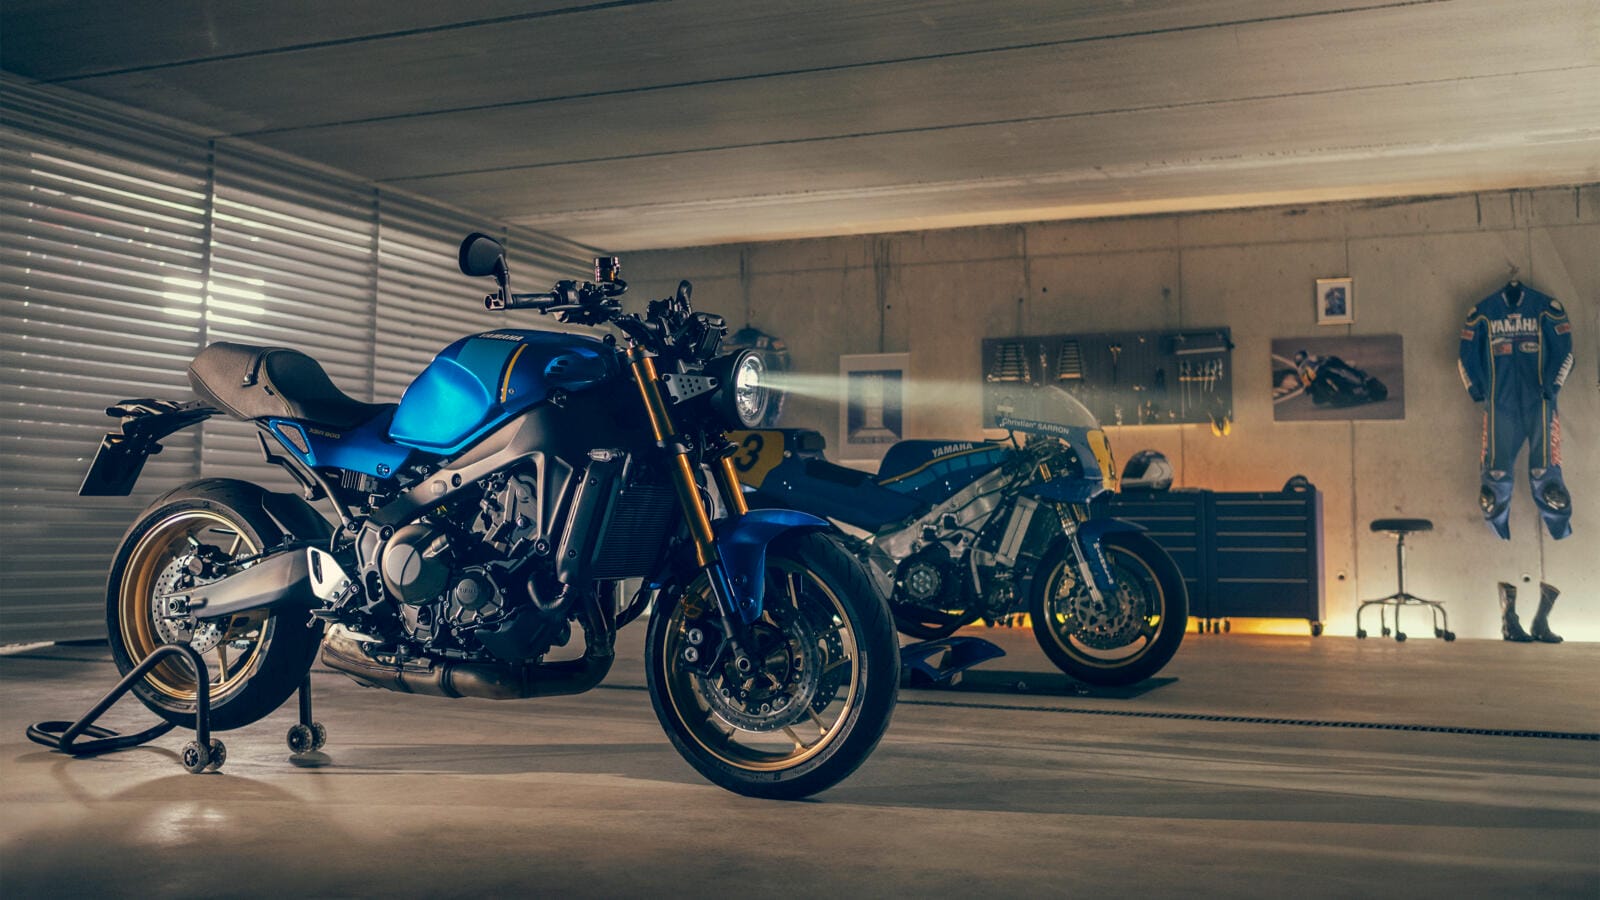 Yamaha XSR 900 2022
- also in the MOTORCYCLES.NEWS APP